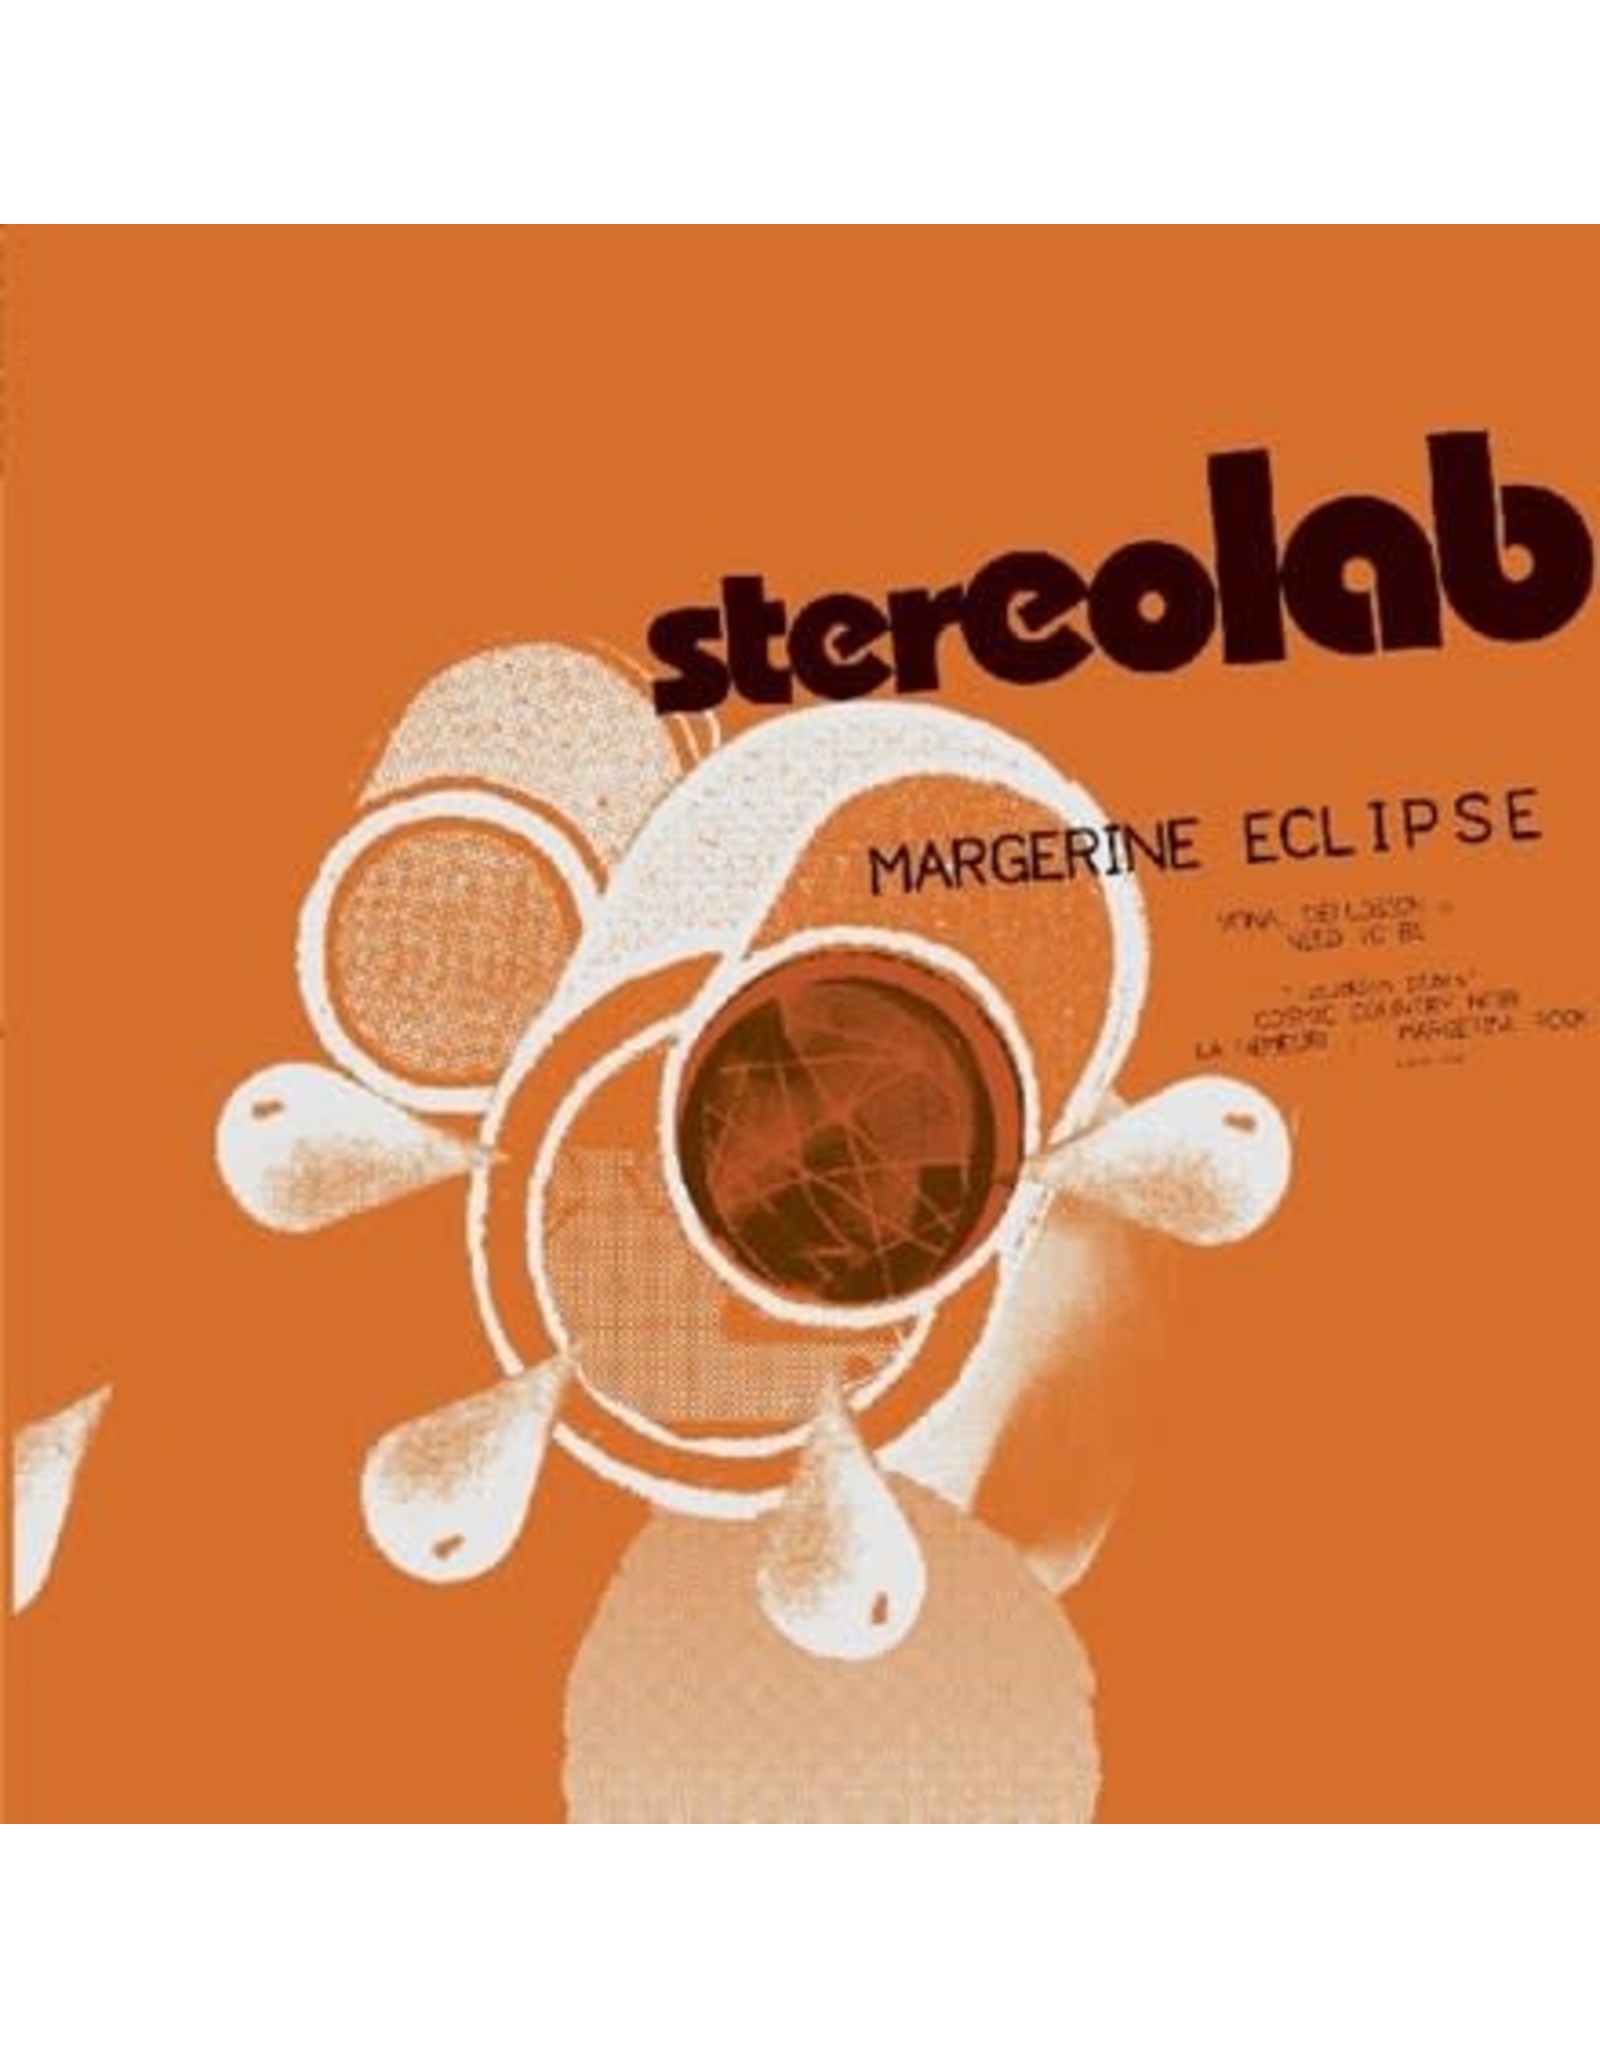 Duophonic Stereolab: Margerine Eclipse LP